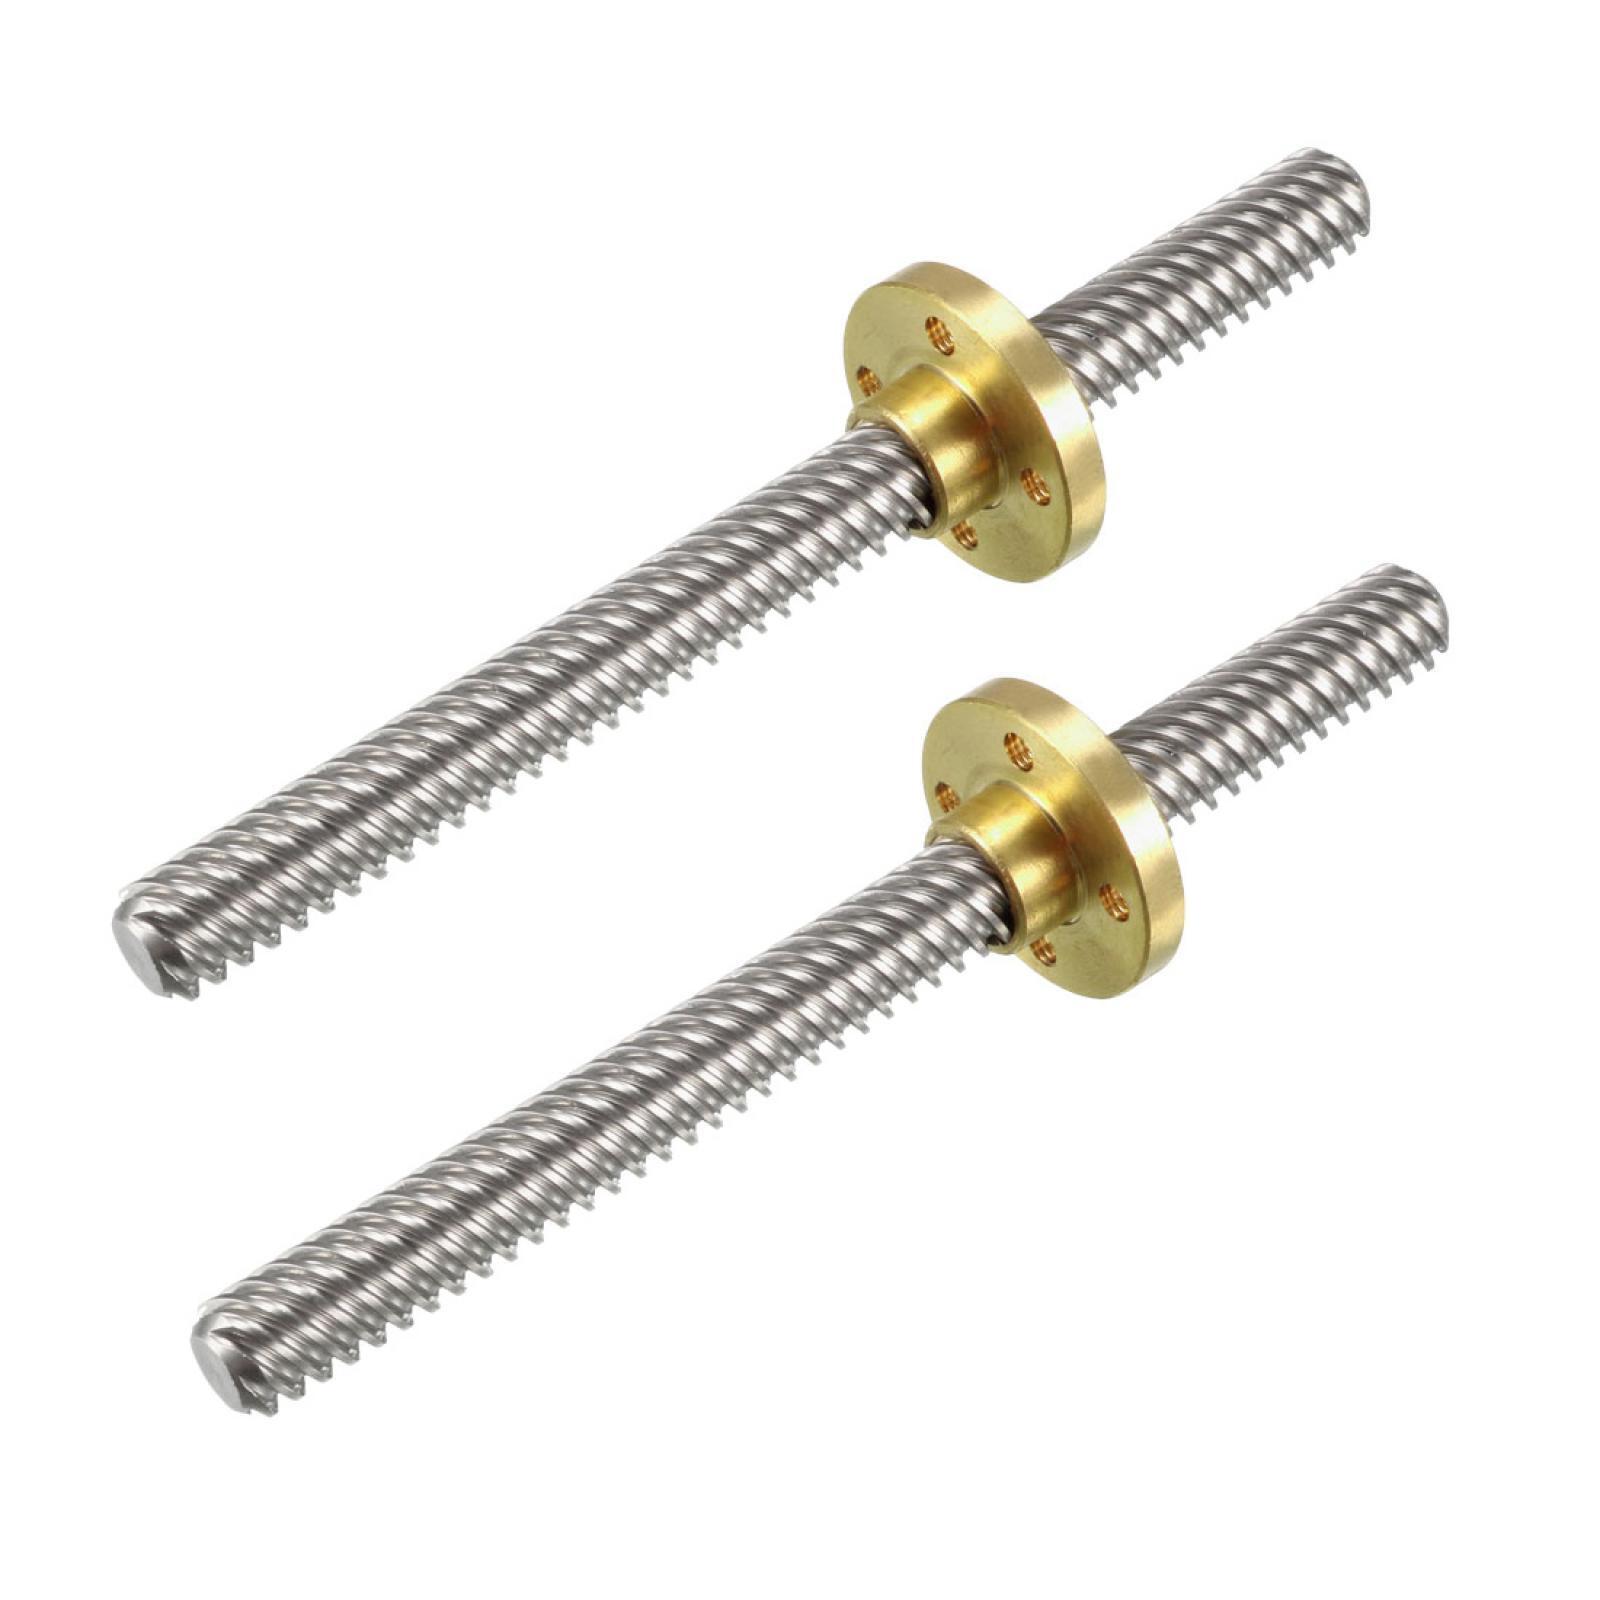 2pcs 100mm T8 Pitch 2mm Lead 14mm Lead Screw Rod with Copper Nut for 3D Printer